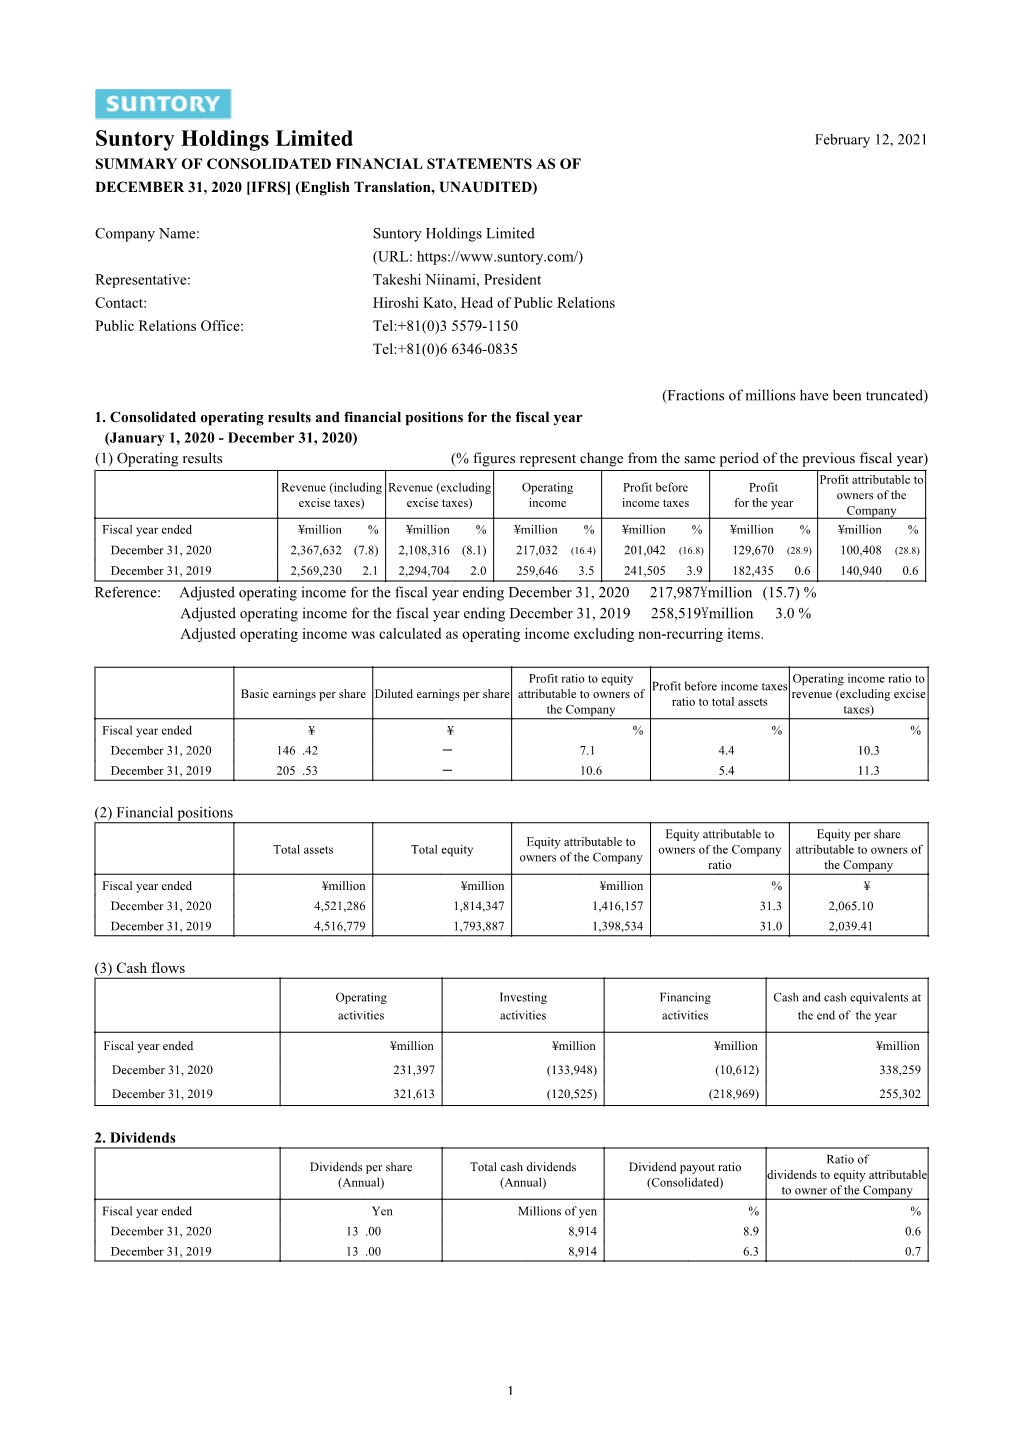 Suntory Holdings Limited February 12, 2021 SUMMARY of CONSOLIDATED FINANCIAL STATEMENTS AS of DECEMBER 31, 2020 [IFRS] (English Translation, UNAUDITED)